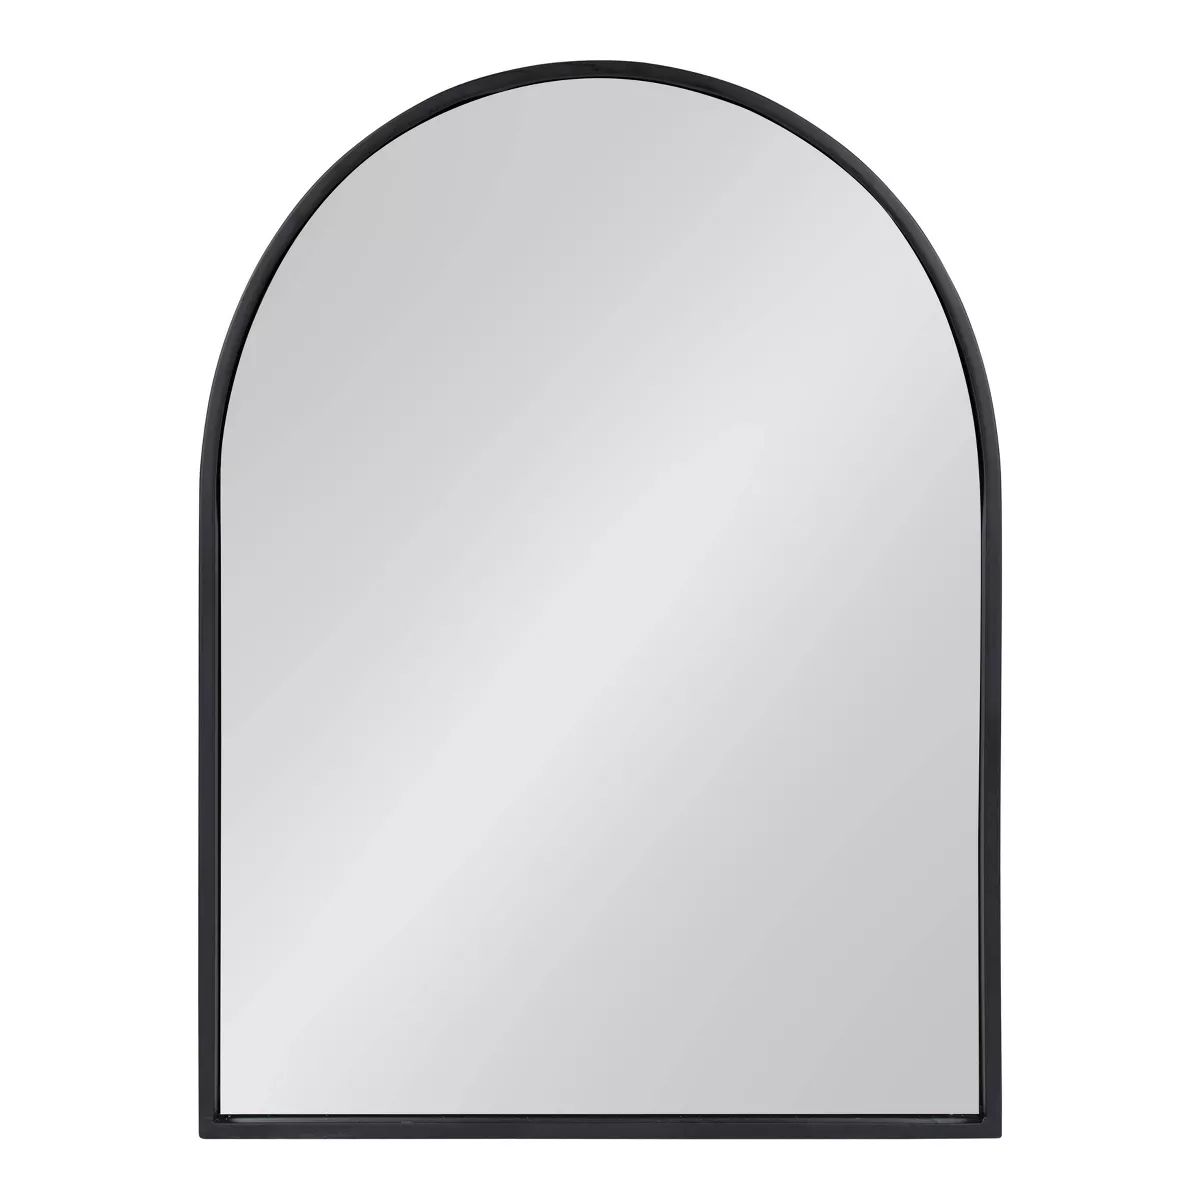 24" x 32" Valenti Framed Arch Mirror Black - Kate and Laurel | Target